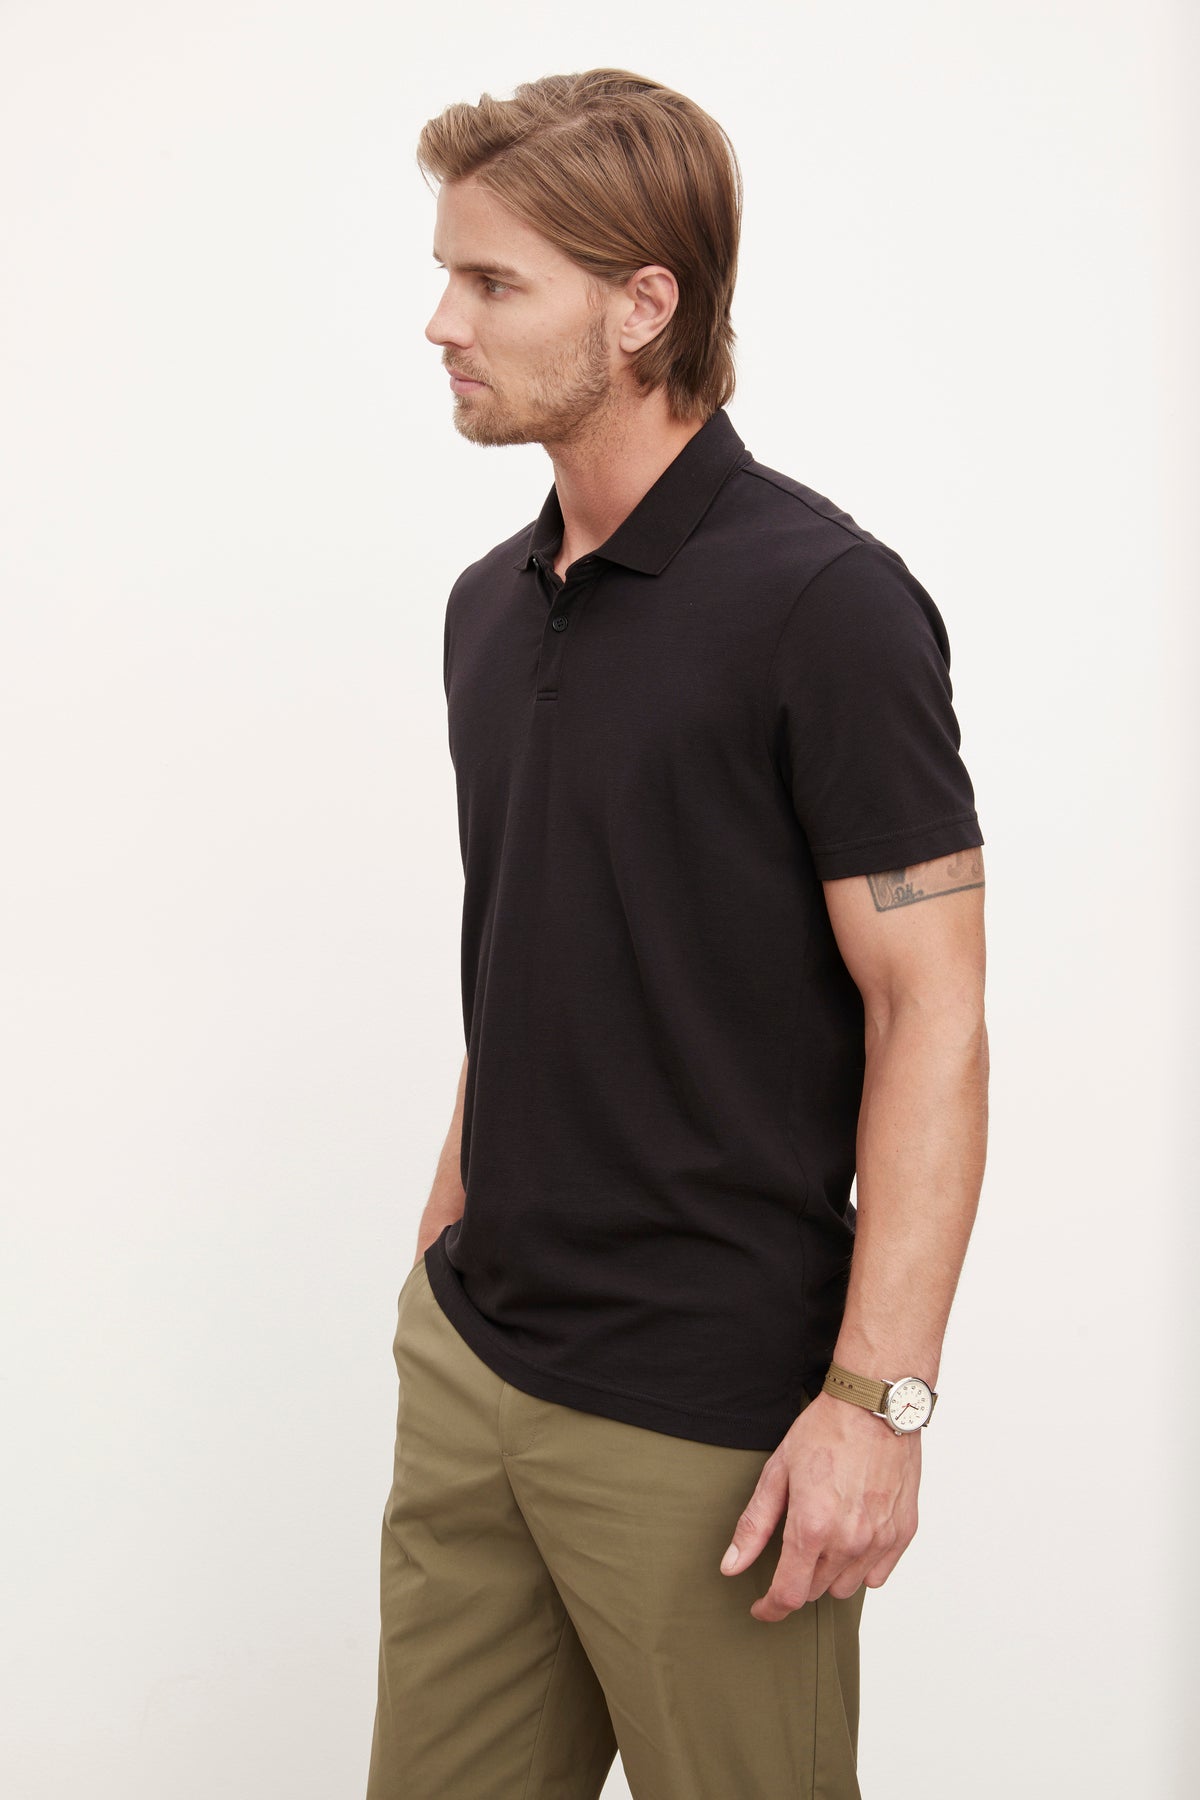 A man wearing a Velvet by Graham & Spencer Willis Pique Polo shirt and khaki pants.-36009040478401